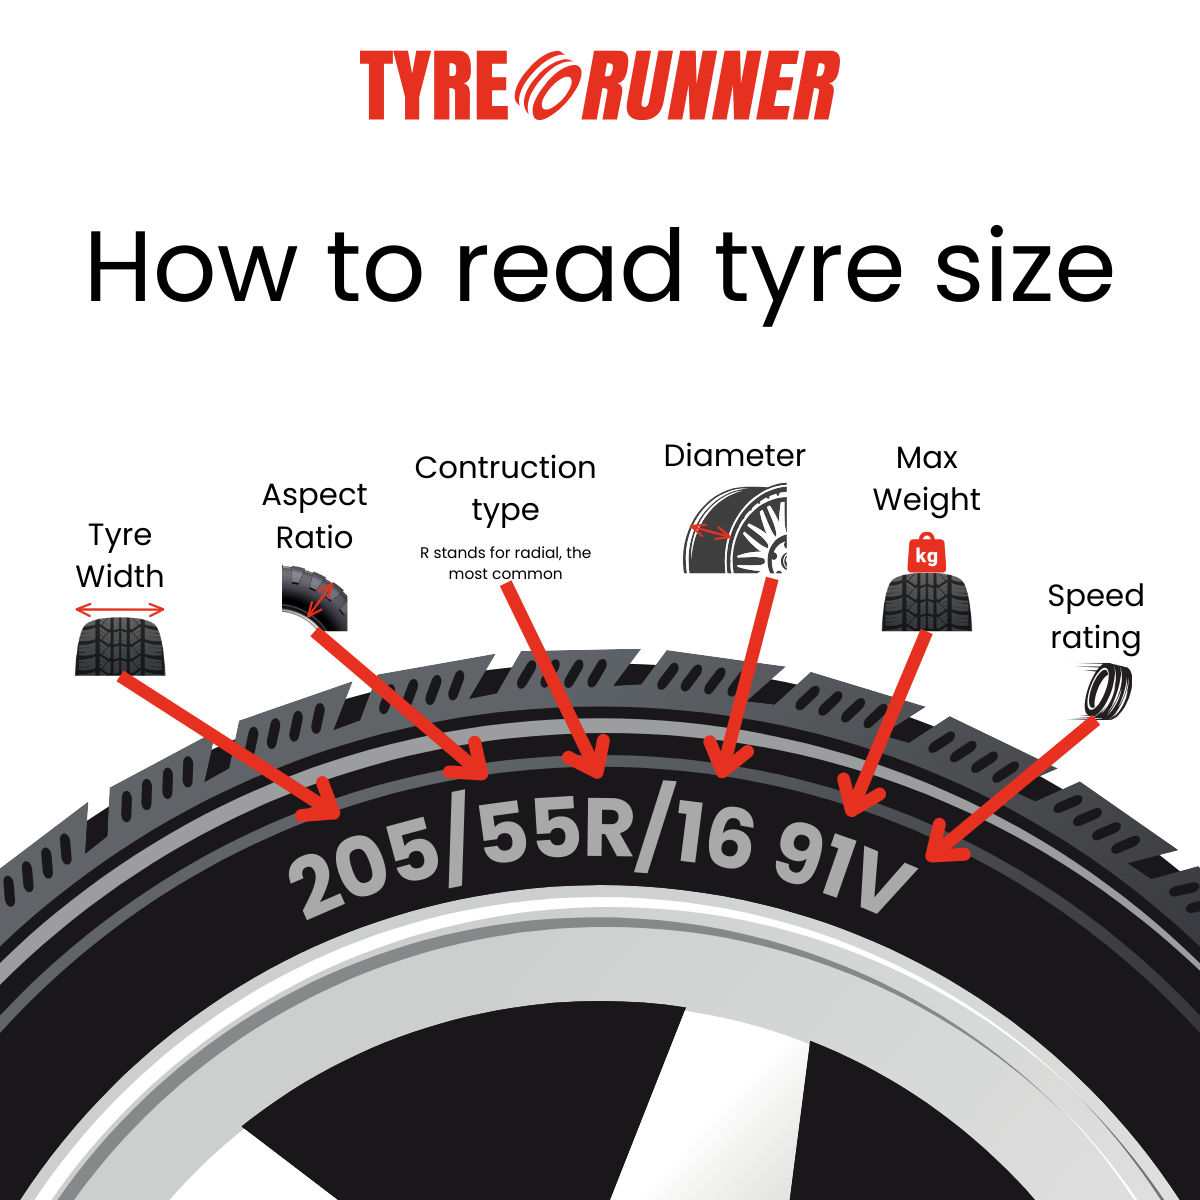 Getting the right tyre size is crucial for your vehicle's performance 🚗. But what do those numbers on your tyres actually mean? 

#TyreSizeMatters #InformedChoices #TyreRunner
#TyreSafety #CarCareTips #AutoMaintenance